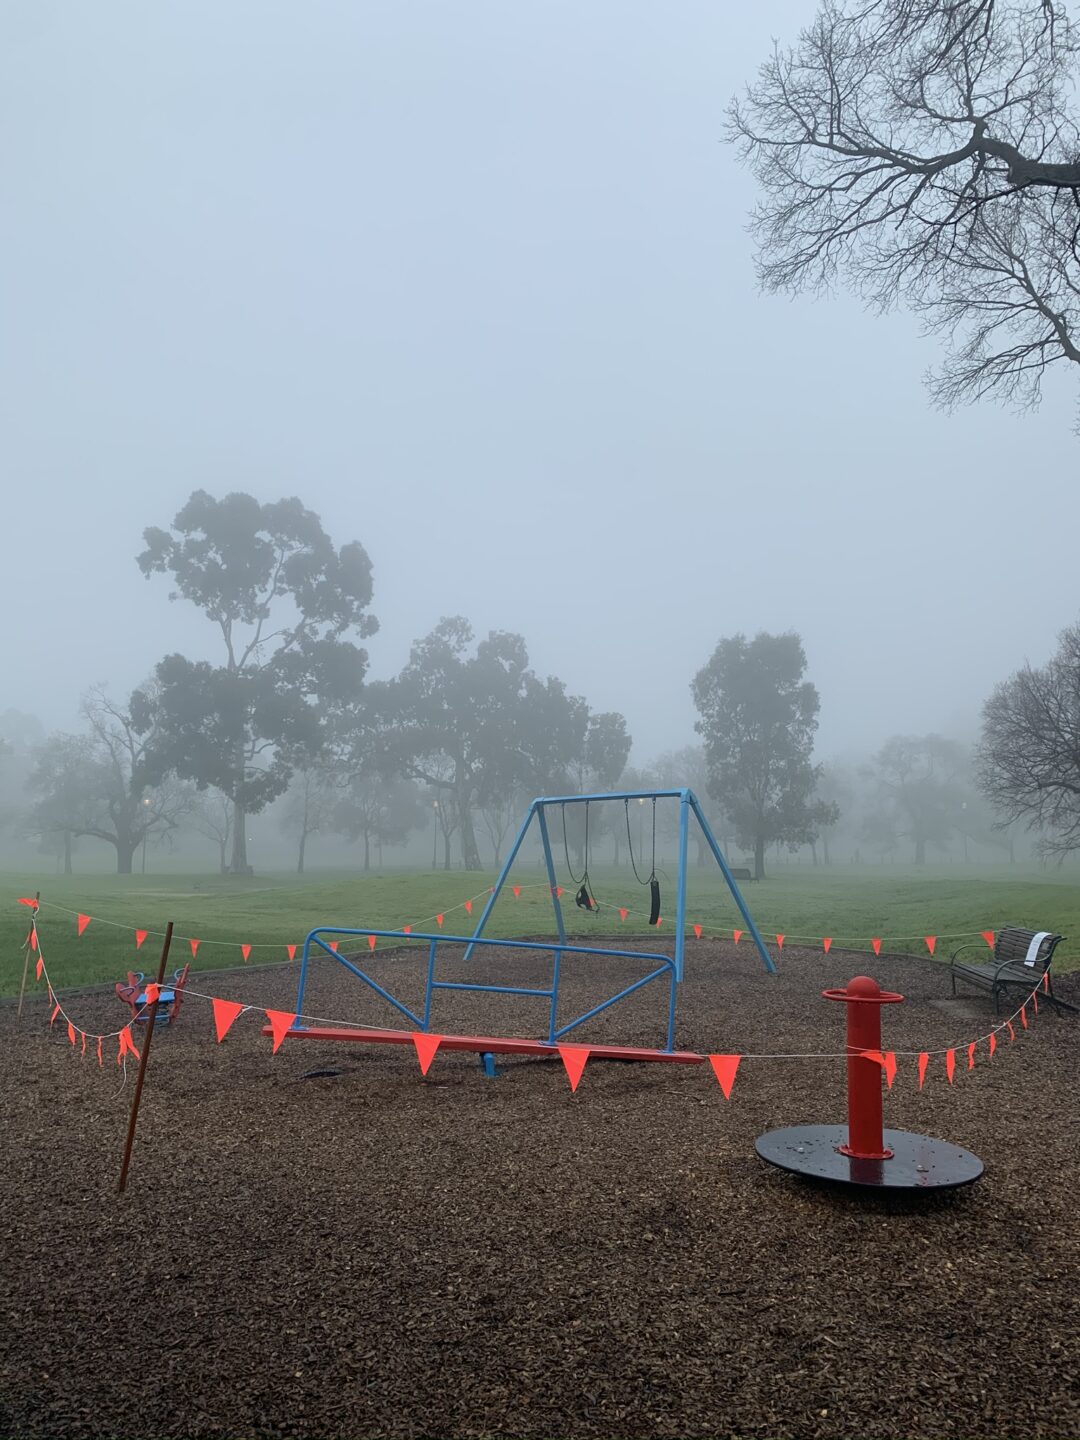 A frosty, foggy winter's morning. Blue children's play equipment is cordoned off by red and orange bunting.  